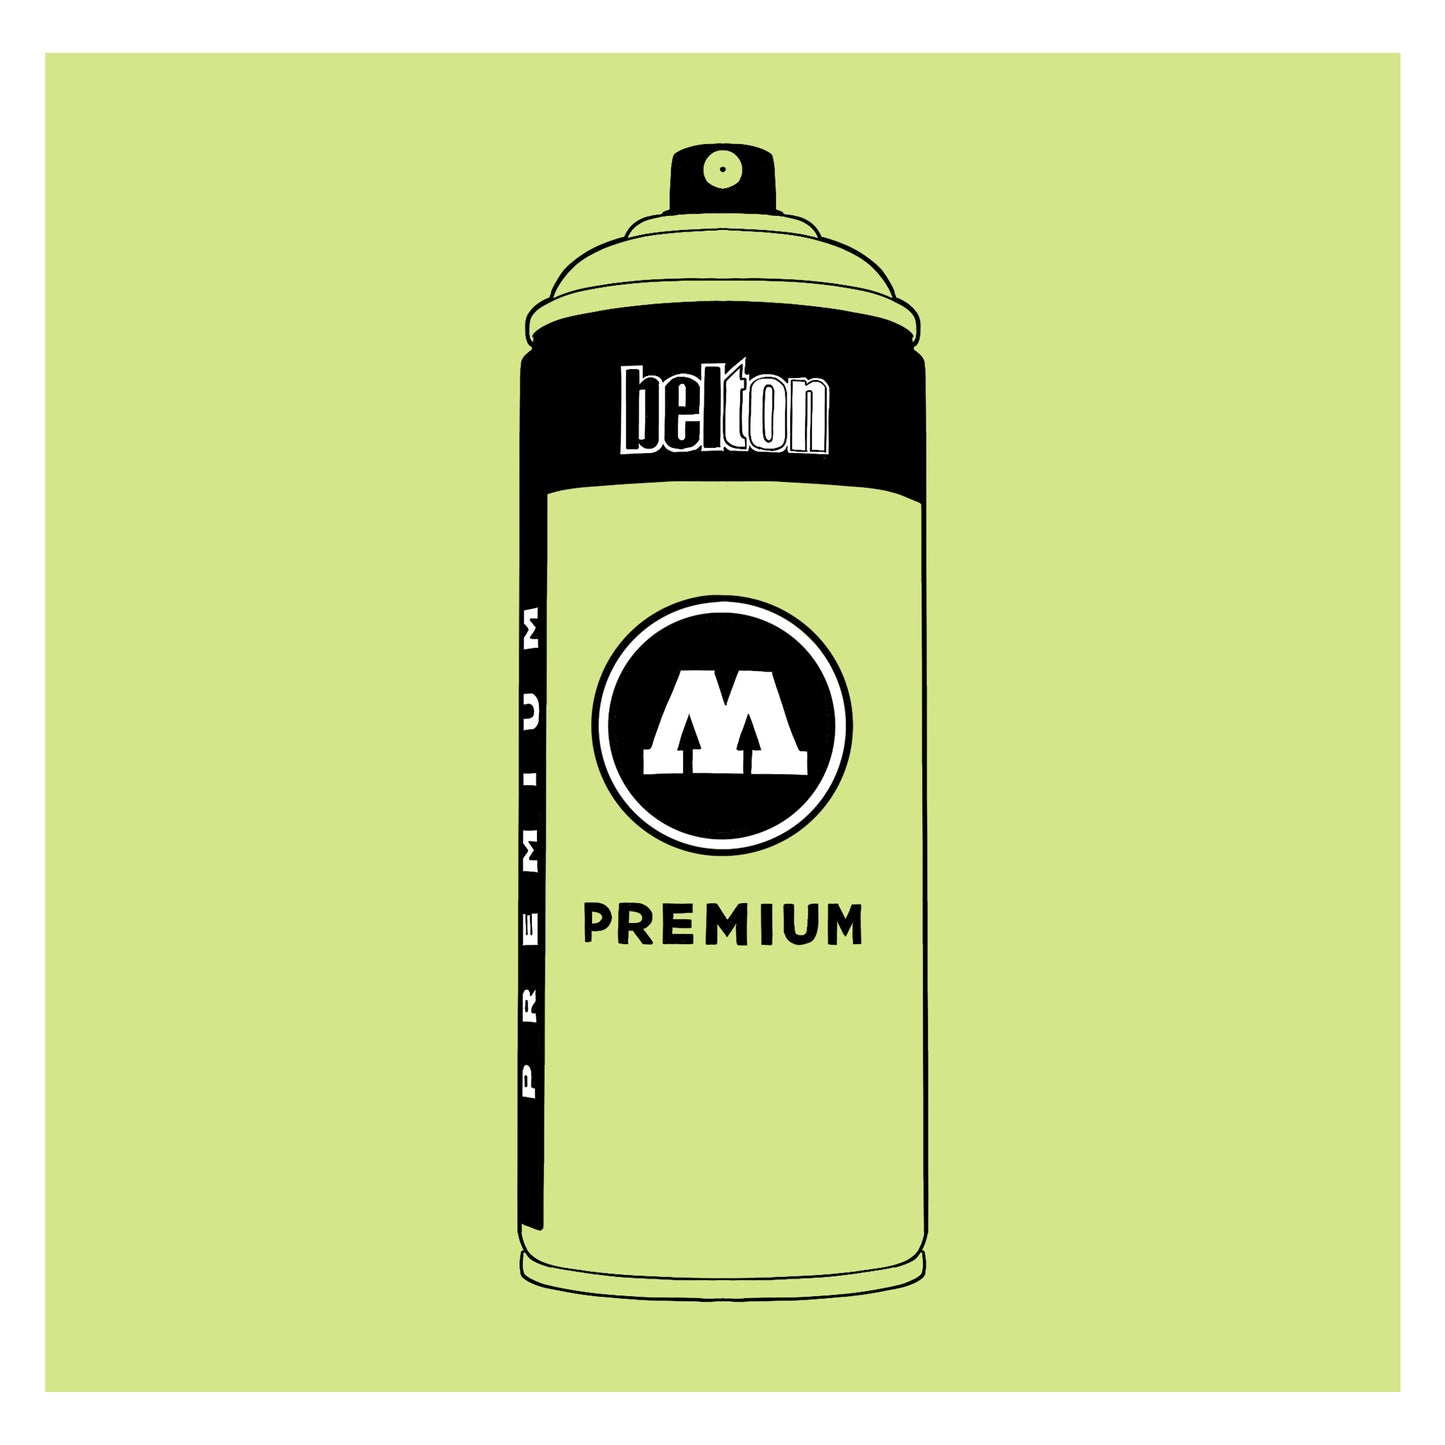 A black outline drawing of a pastel green gold spray paint can with the words "belton","premium" and the letter"M" written on the face in black and white font. The background is a color swatch of the same pastel green with a white border